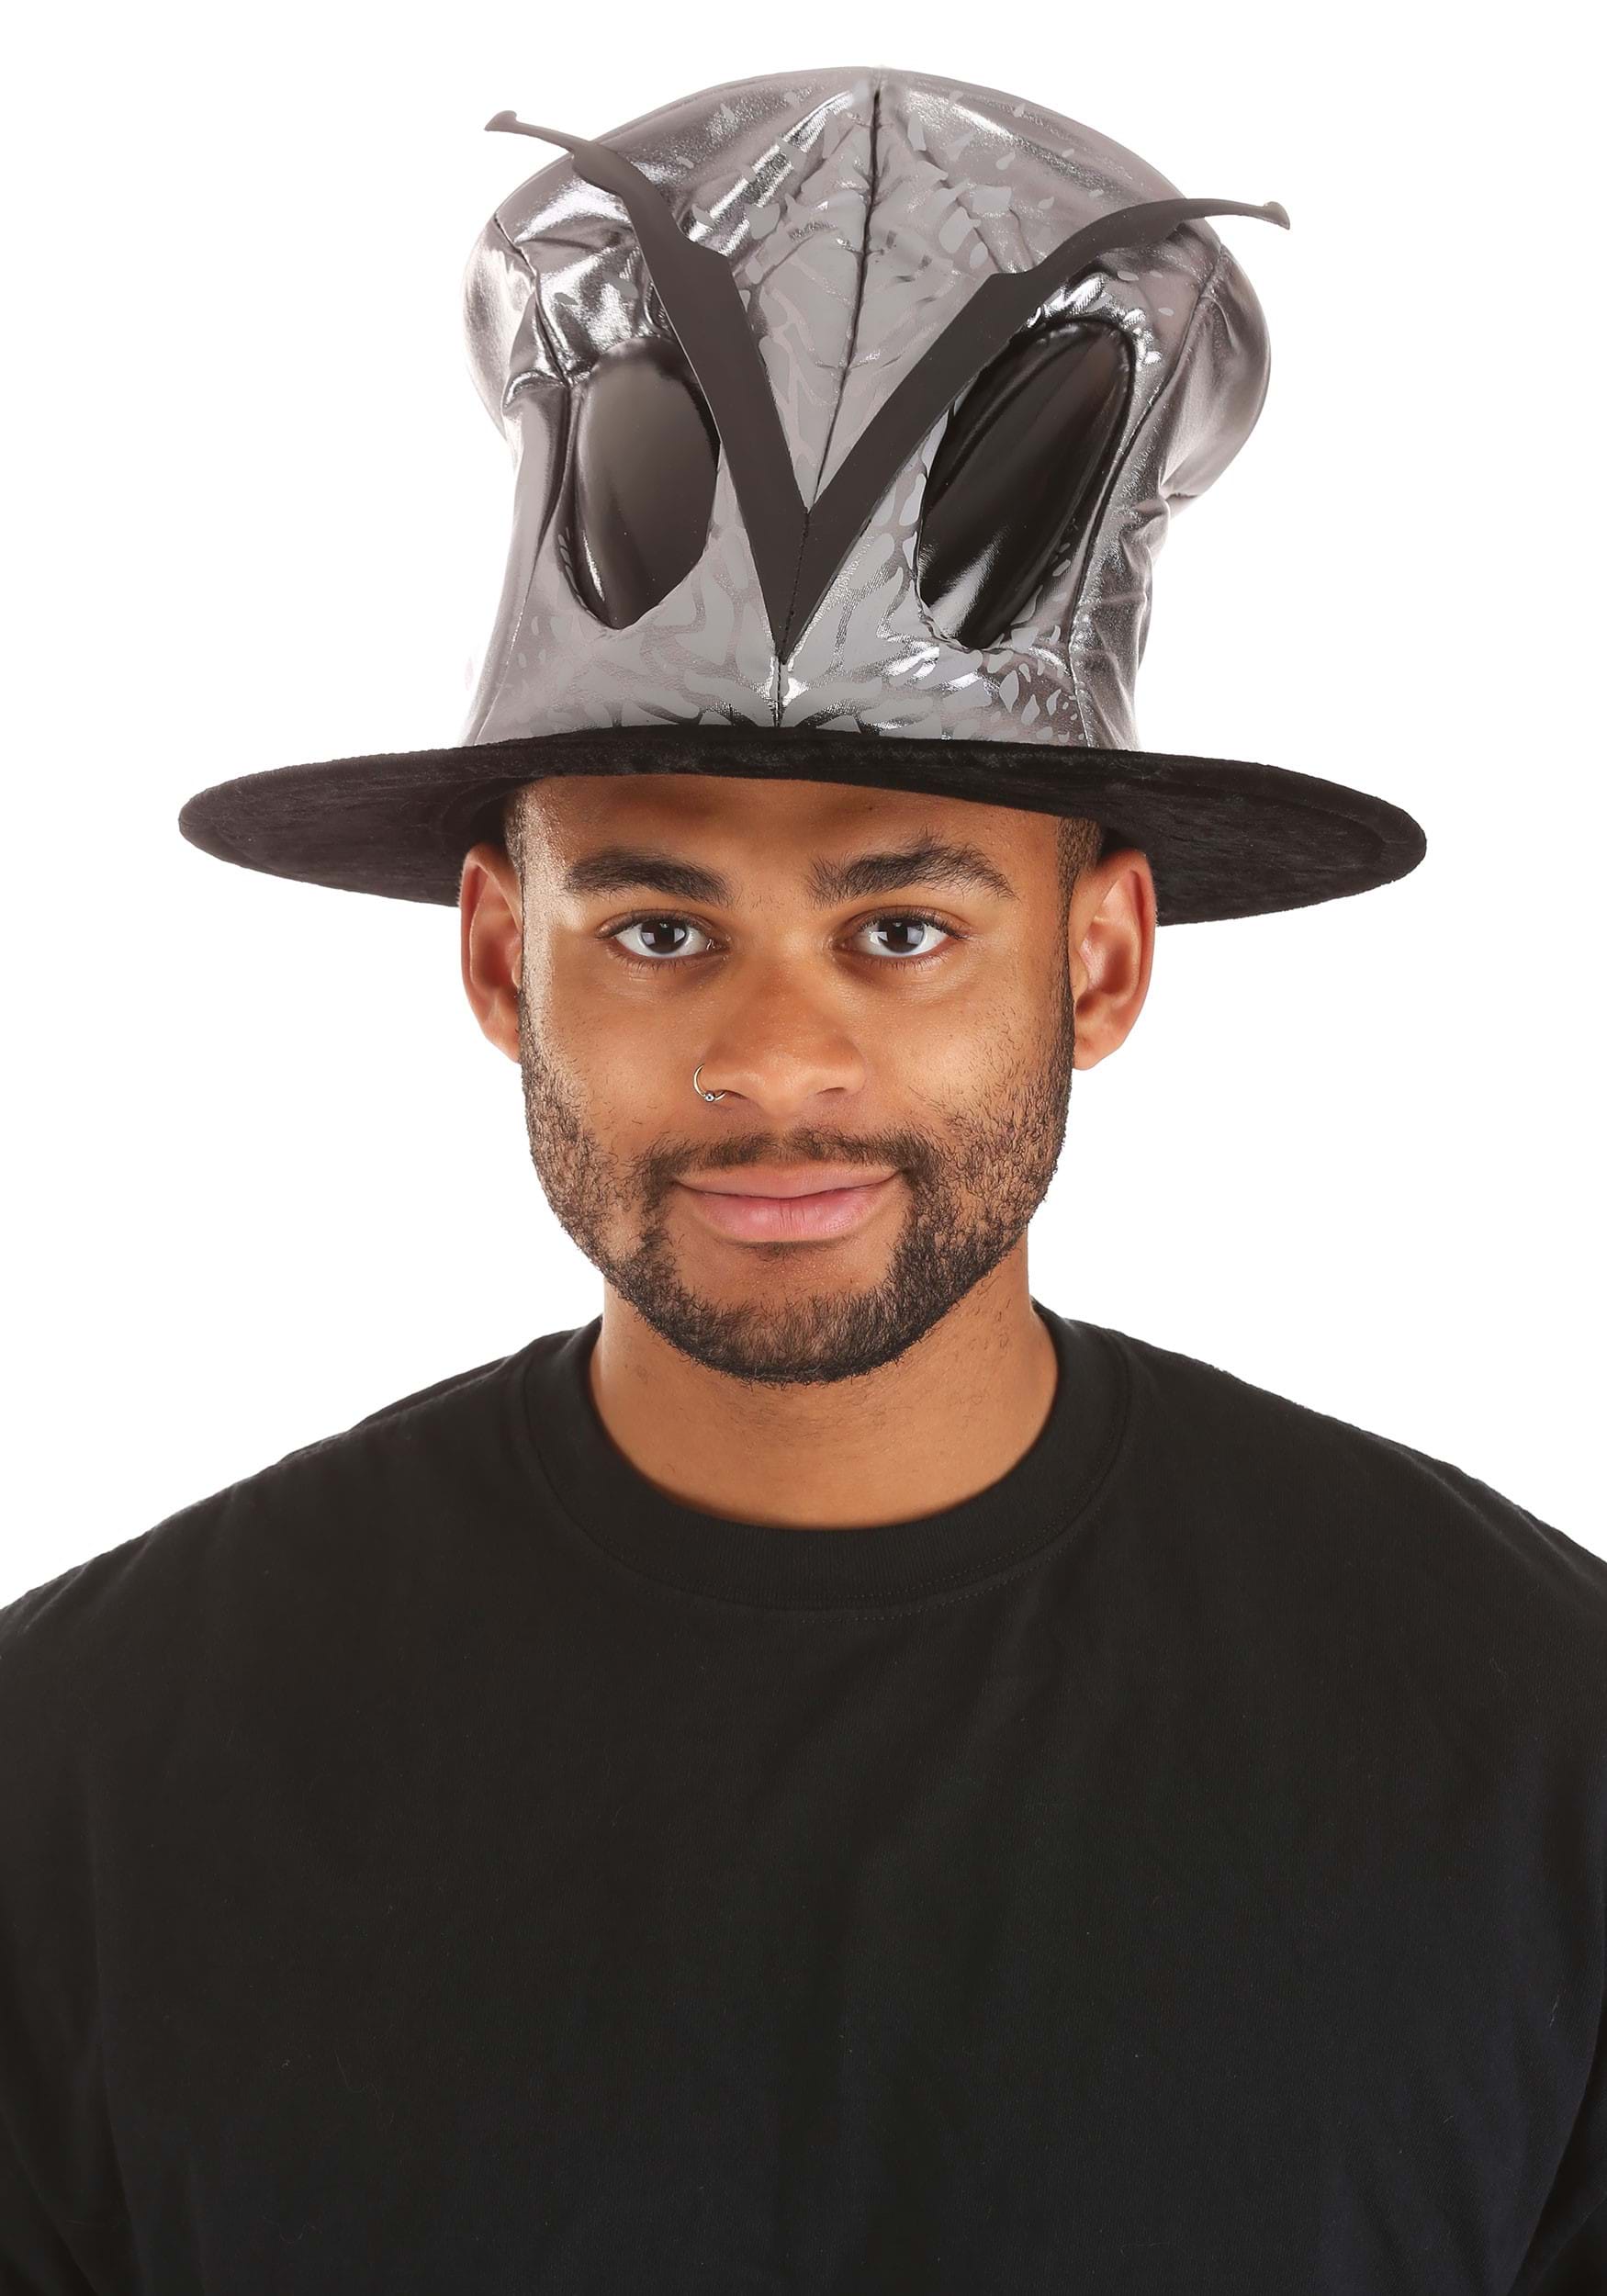 Adult Silver Ovo Top Hat